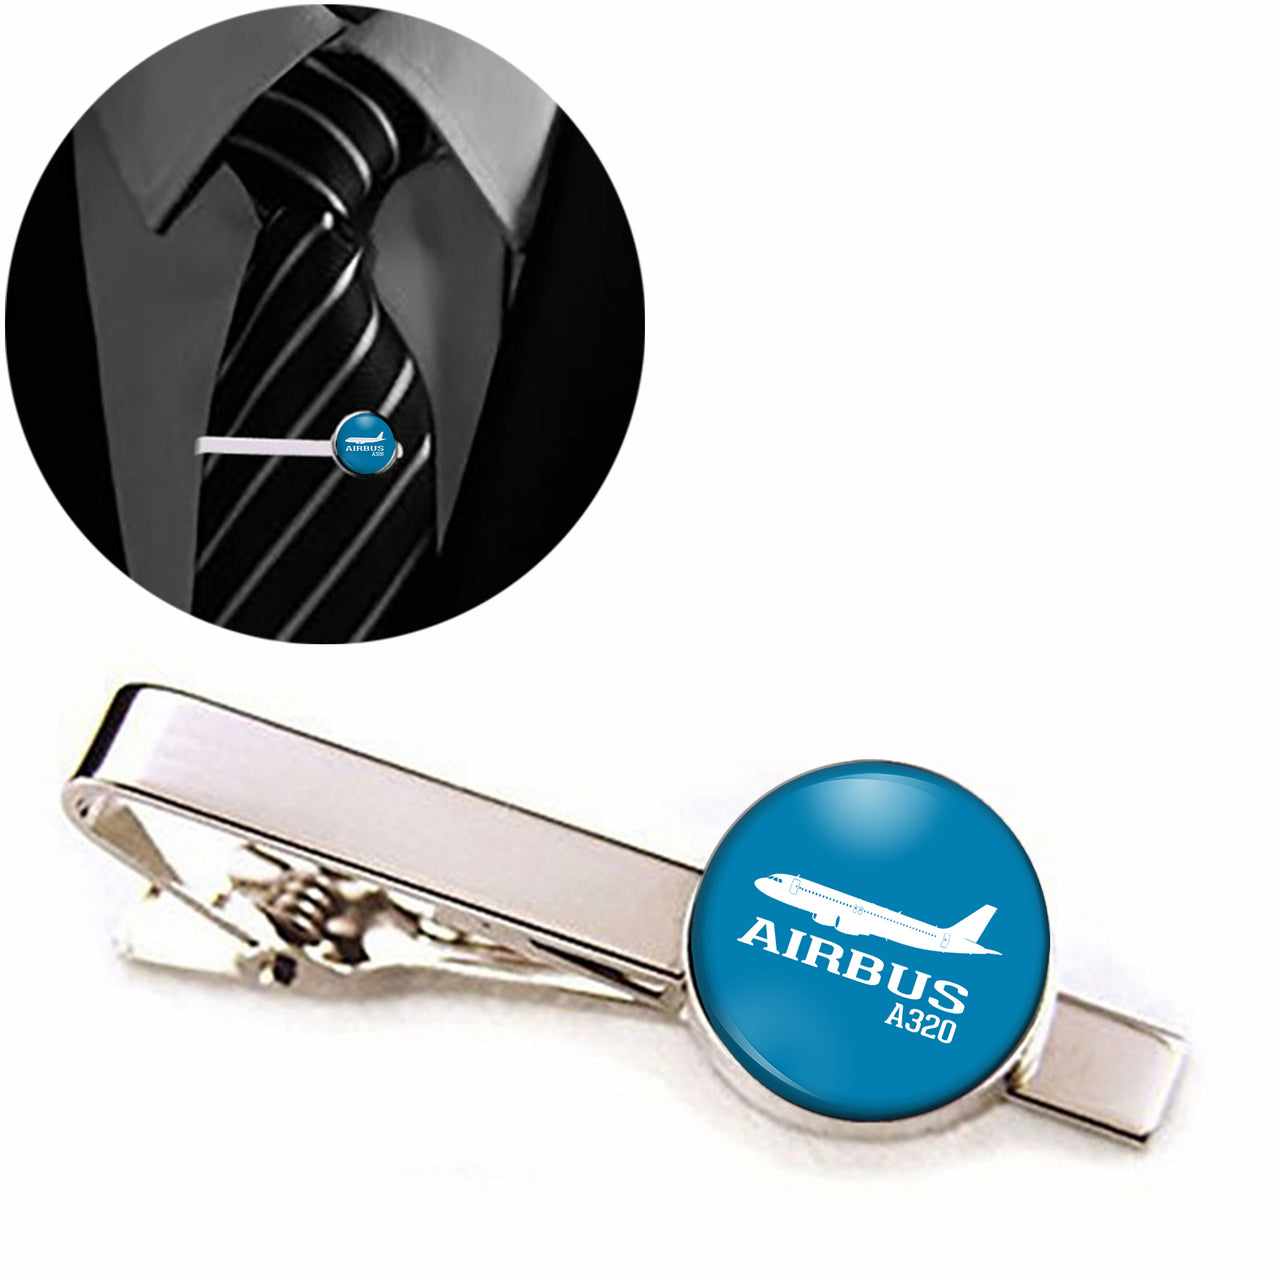 Airbus A320 Printed Designed Tie Clips